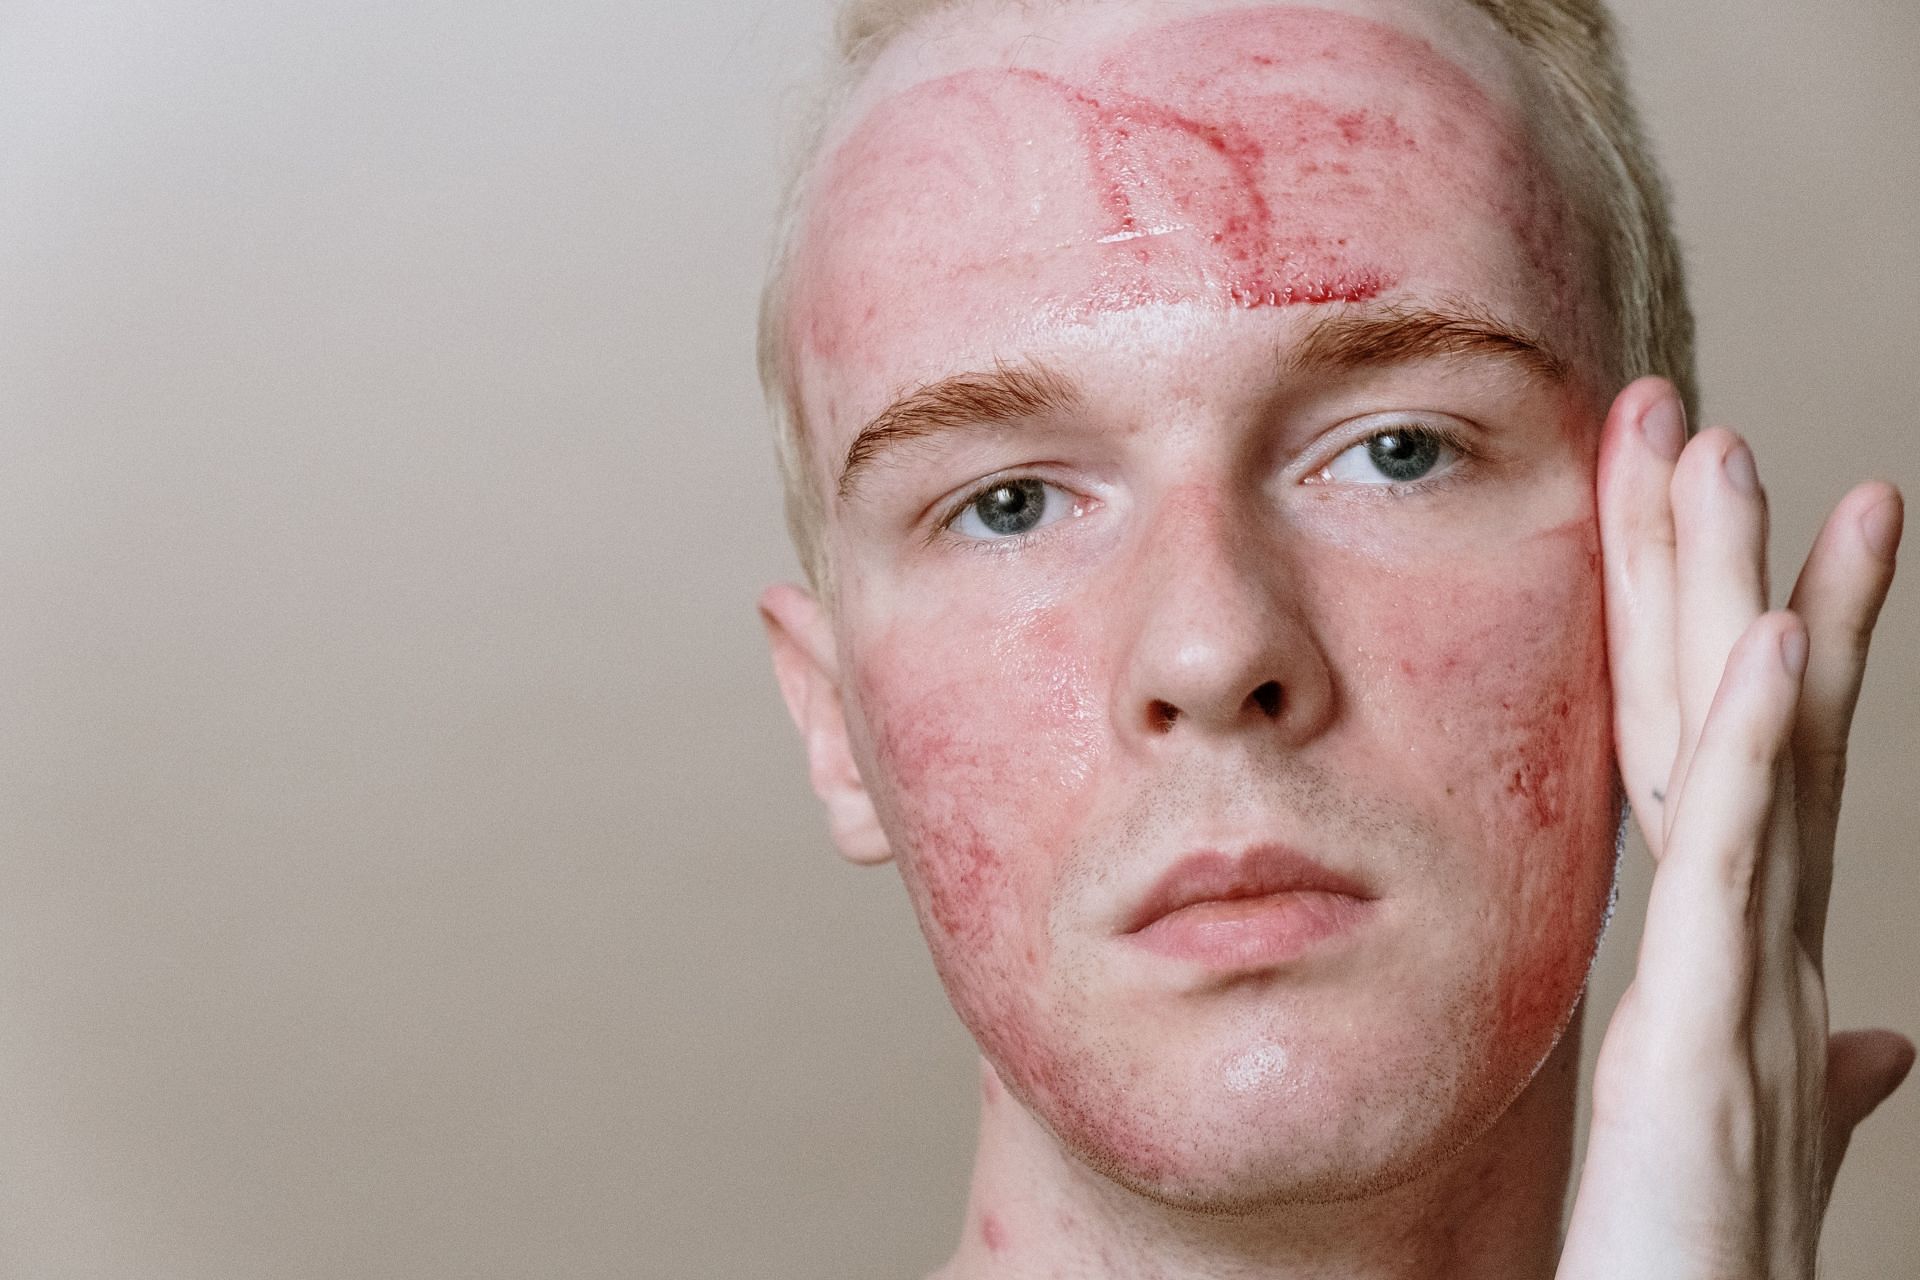 Red spots on skin can be frustrating for some. (Image via Pexels / Cottonbro Studio)